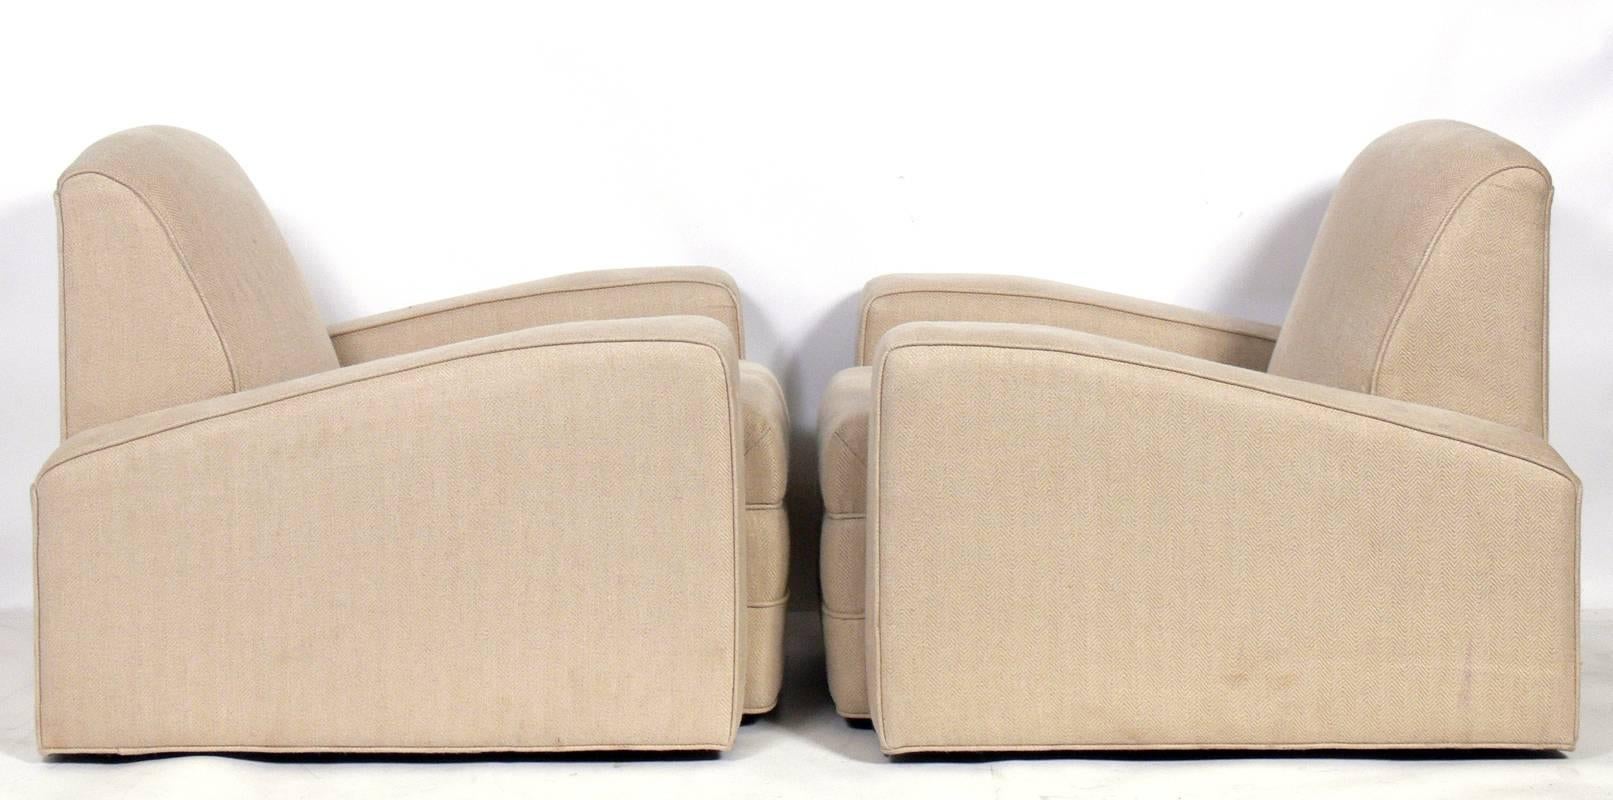 Pair of low slung Art Deco lounge chairs, French, 1930s. They have a chic low slung form. They are currently being reupholstered and can be completed in your fabric. The price noted below includes reupholstery in your fabric. Simply send us 12 yards